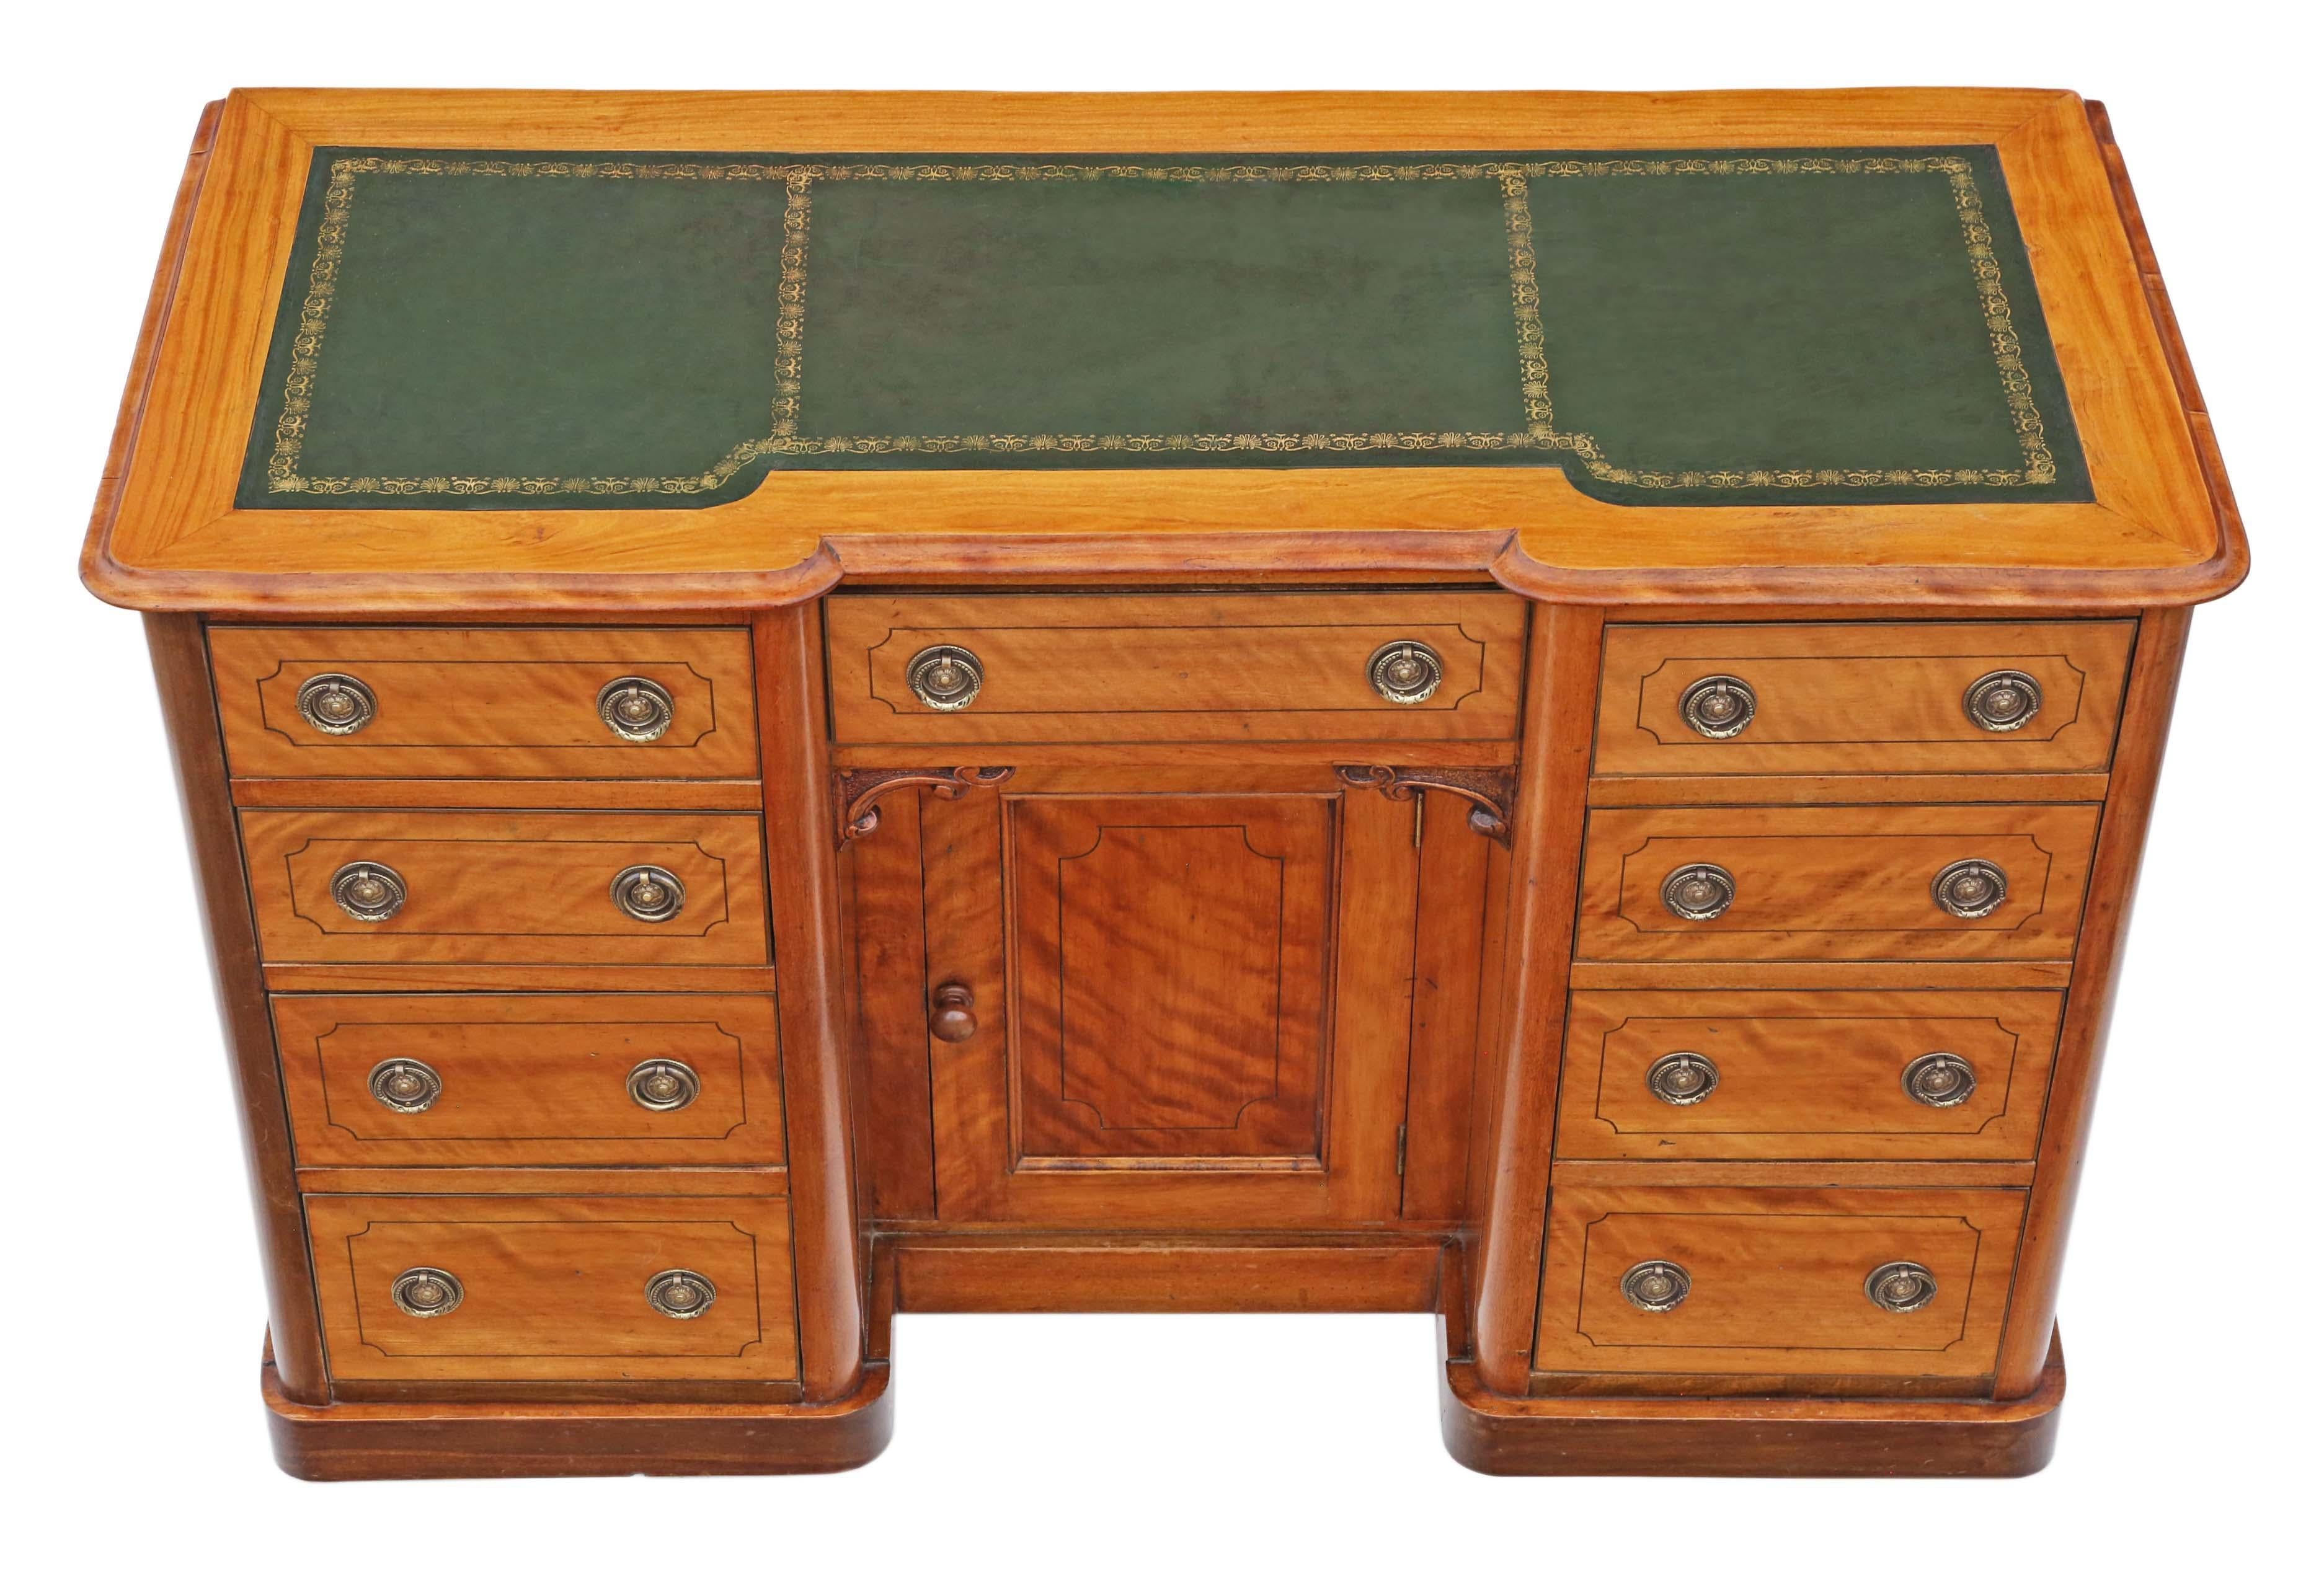 Antique quality Victorian mahogany twin pedestal desk writing table C1890.

This is a lovely piece, that is full of age, charm and character. Lovely line inlays.

Later quality tooled green leather writing surface. Attractive age and slight